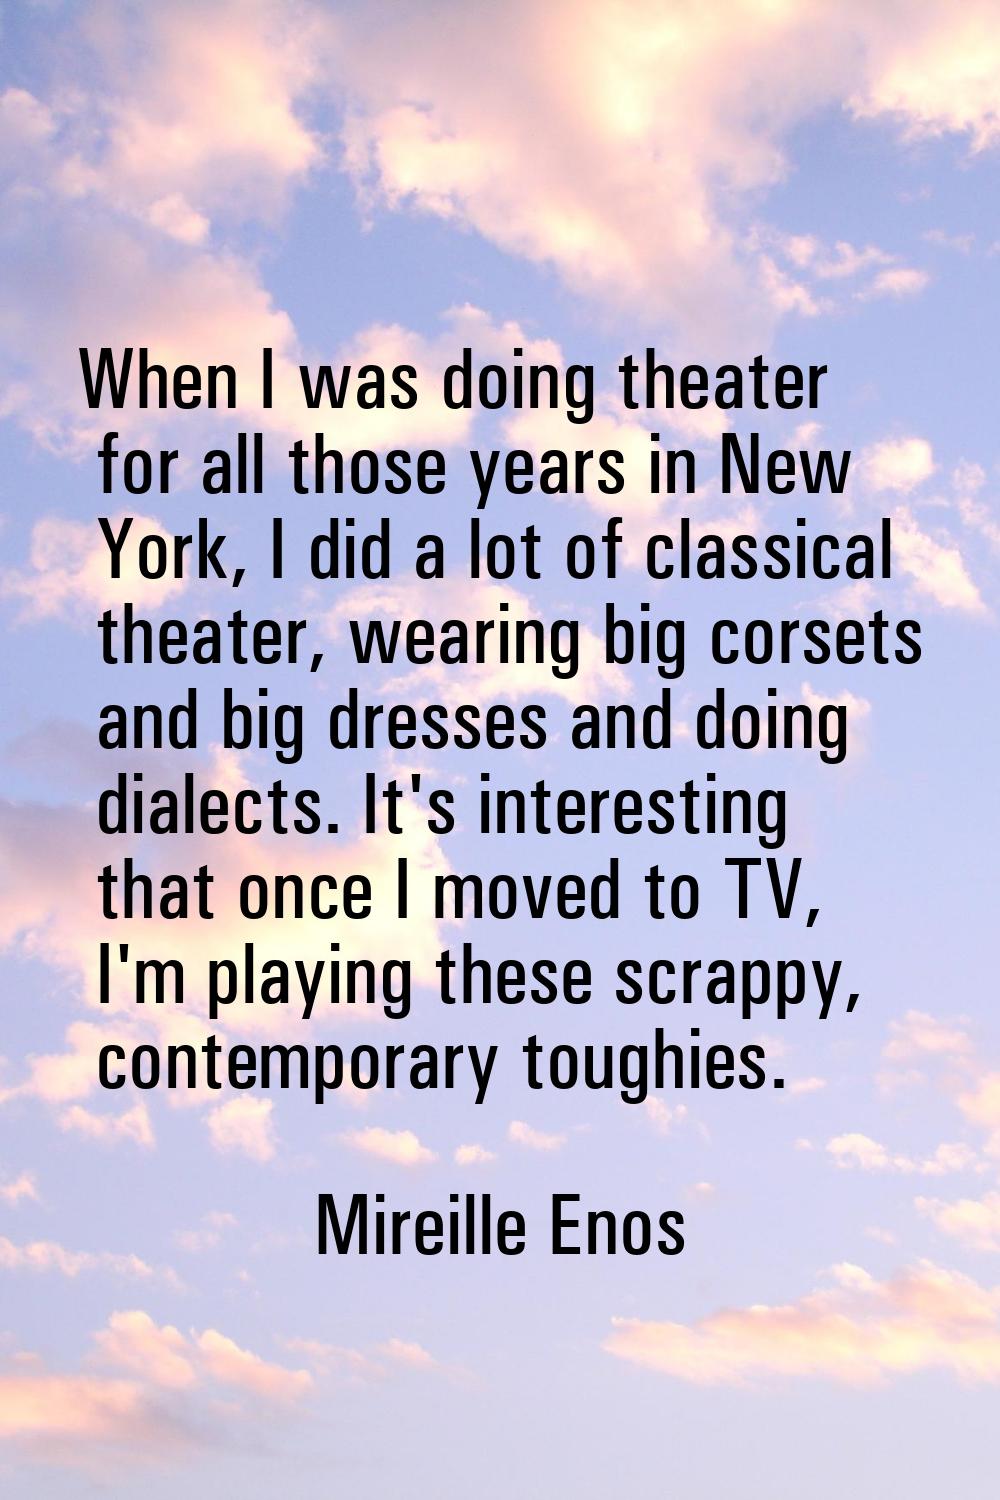 When I was doing theater for all those years in New York, I did a lot of classical theater, wearing